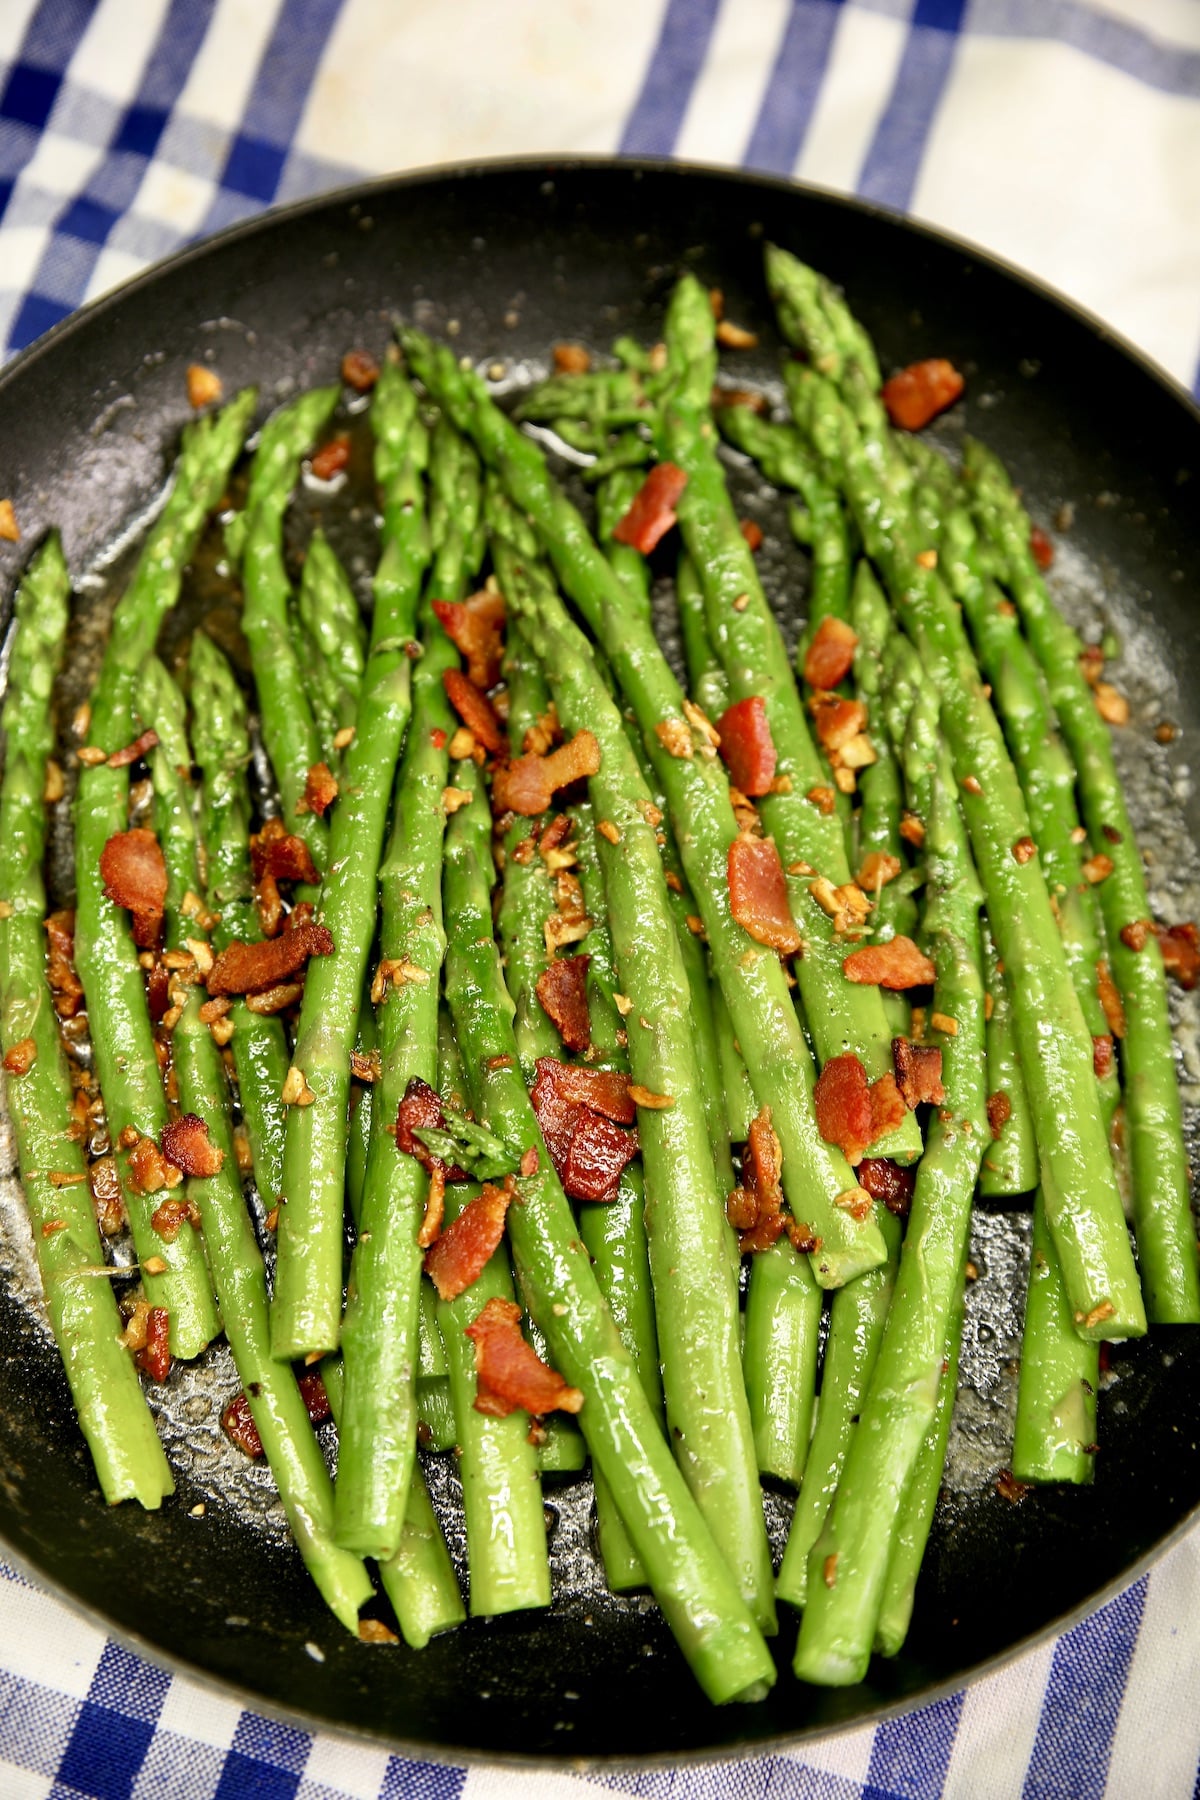 Skillet of asparagus spears topped with garlic butter and bacon crumbles.